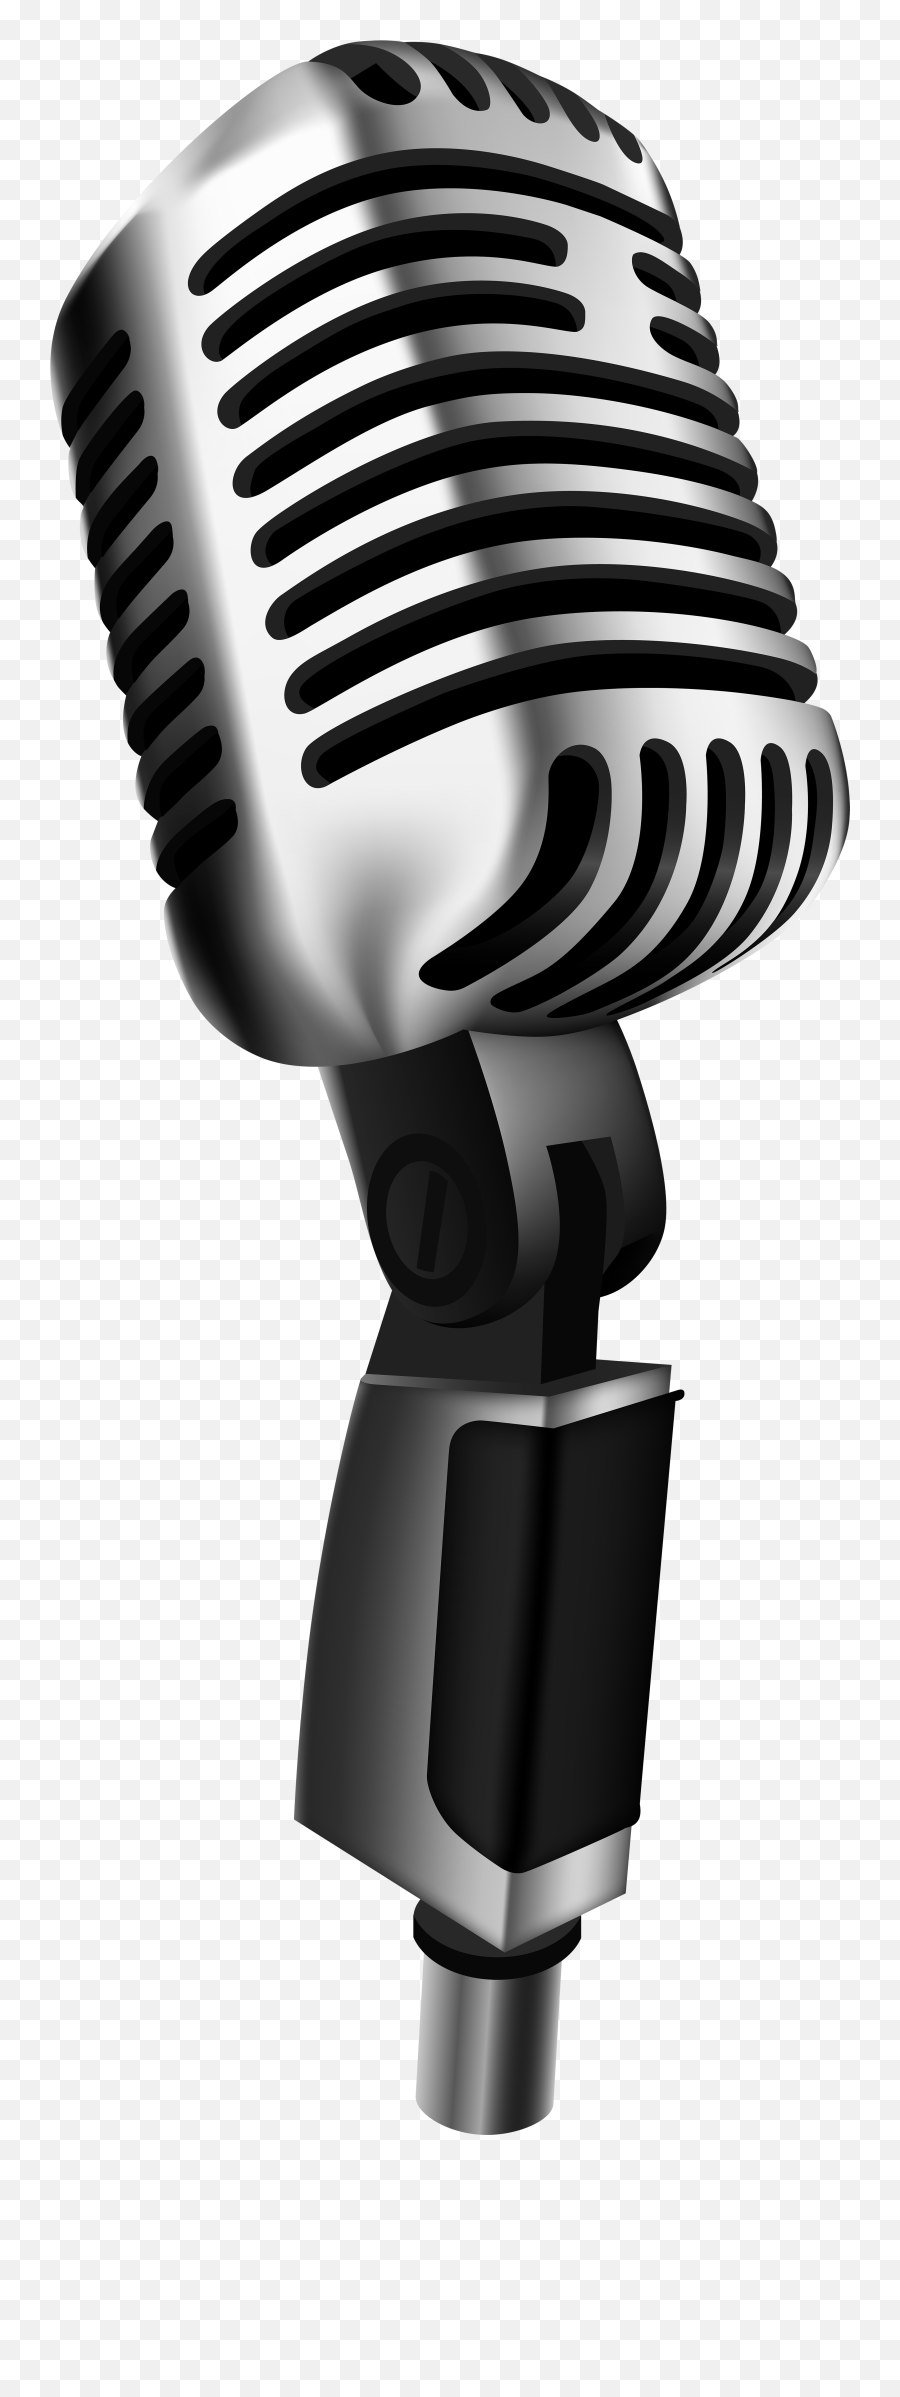 Microphone Transparent Clipart - Microphone Clipart Transparent Emoji,Microphone Emoji